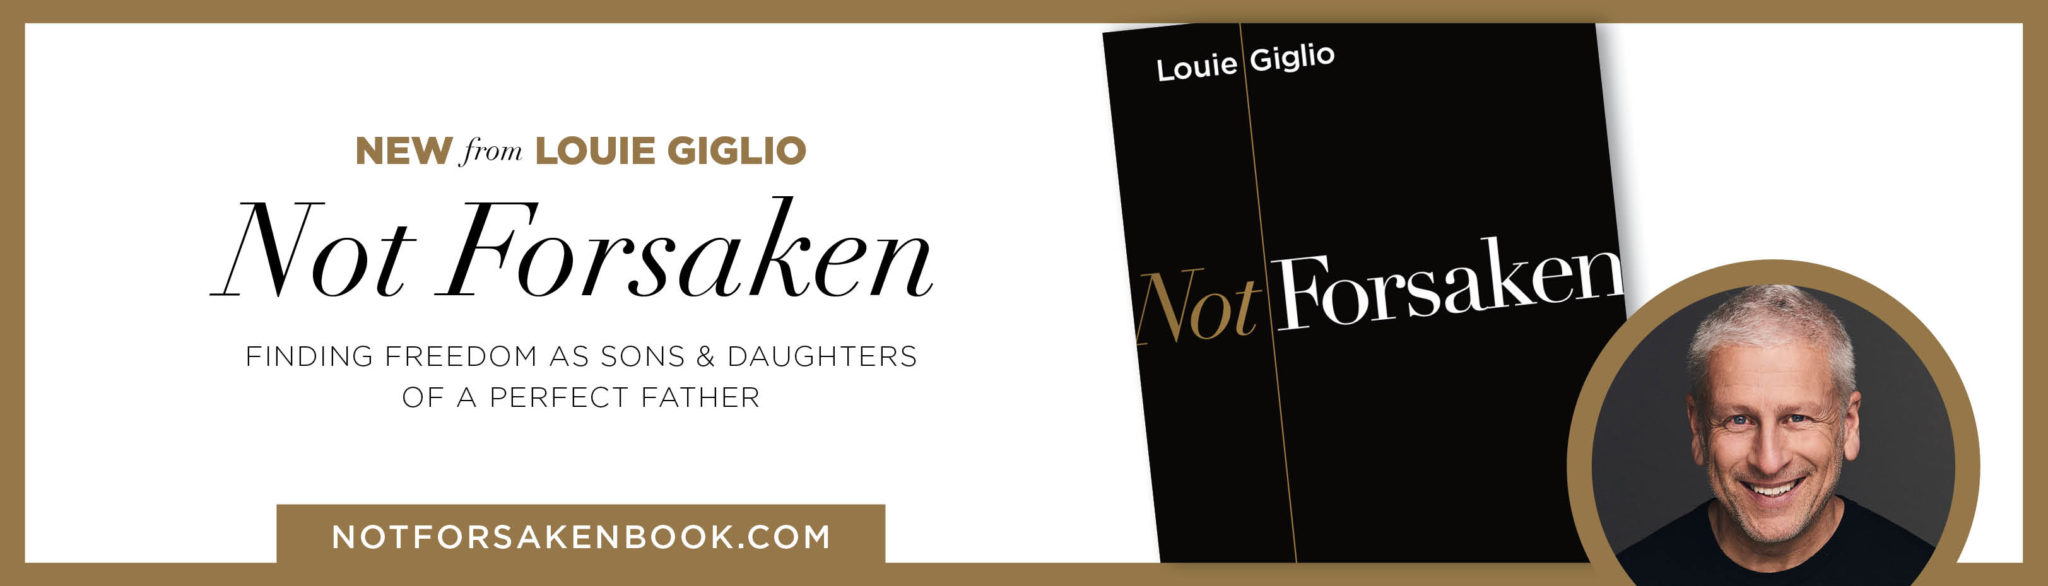 New from Louie Giglio: Not Forsaken. Finding freedom as sons & daughters of a perfect Father